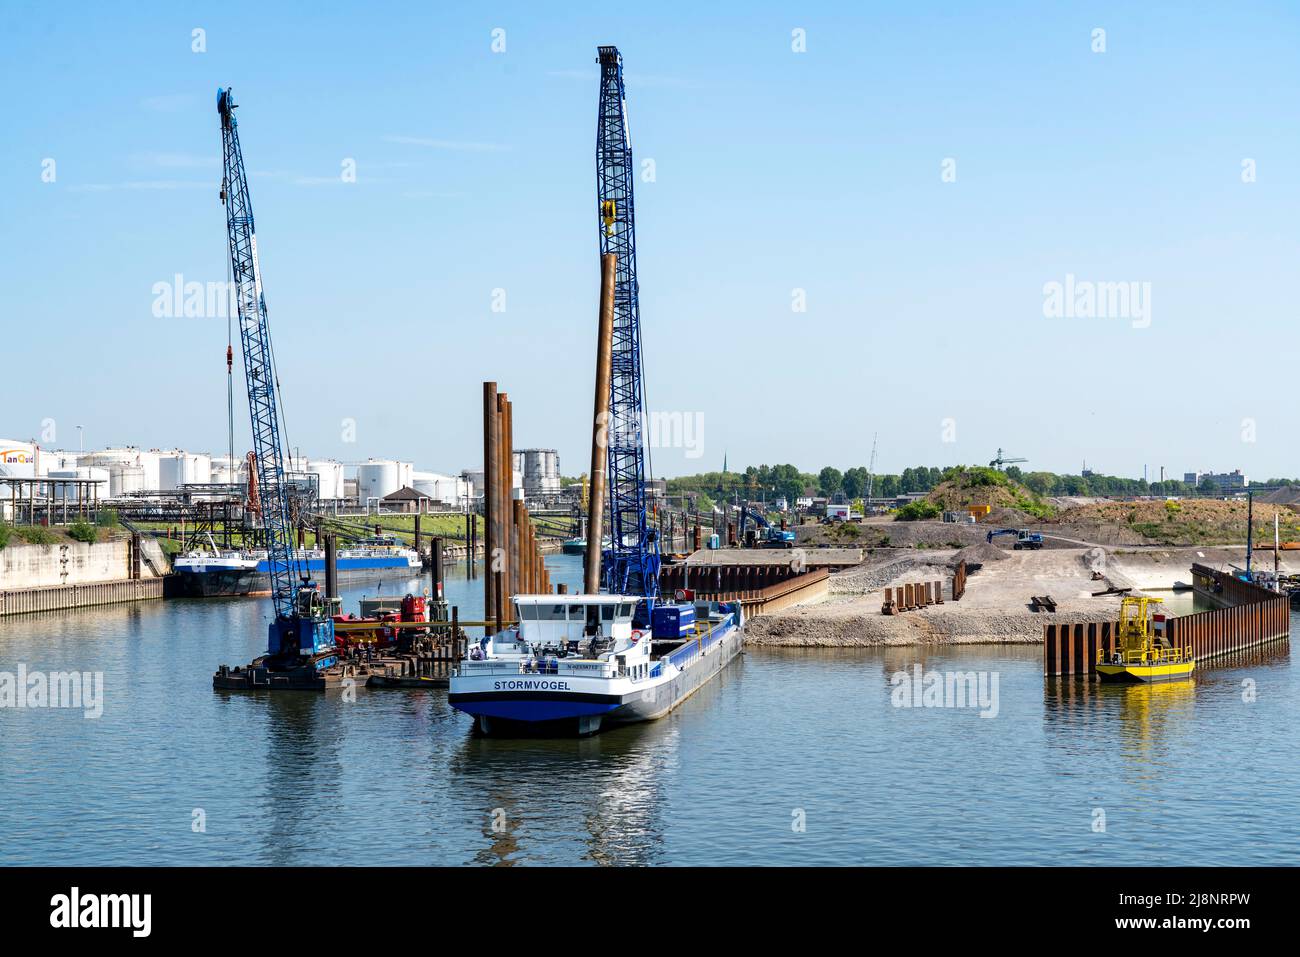 Duisport, Port of Ruhrort, Coal Island, conversion of the old port area into Europe's largest inland trimodal container terminal, land reclamation wor Stock Photo